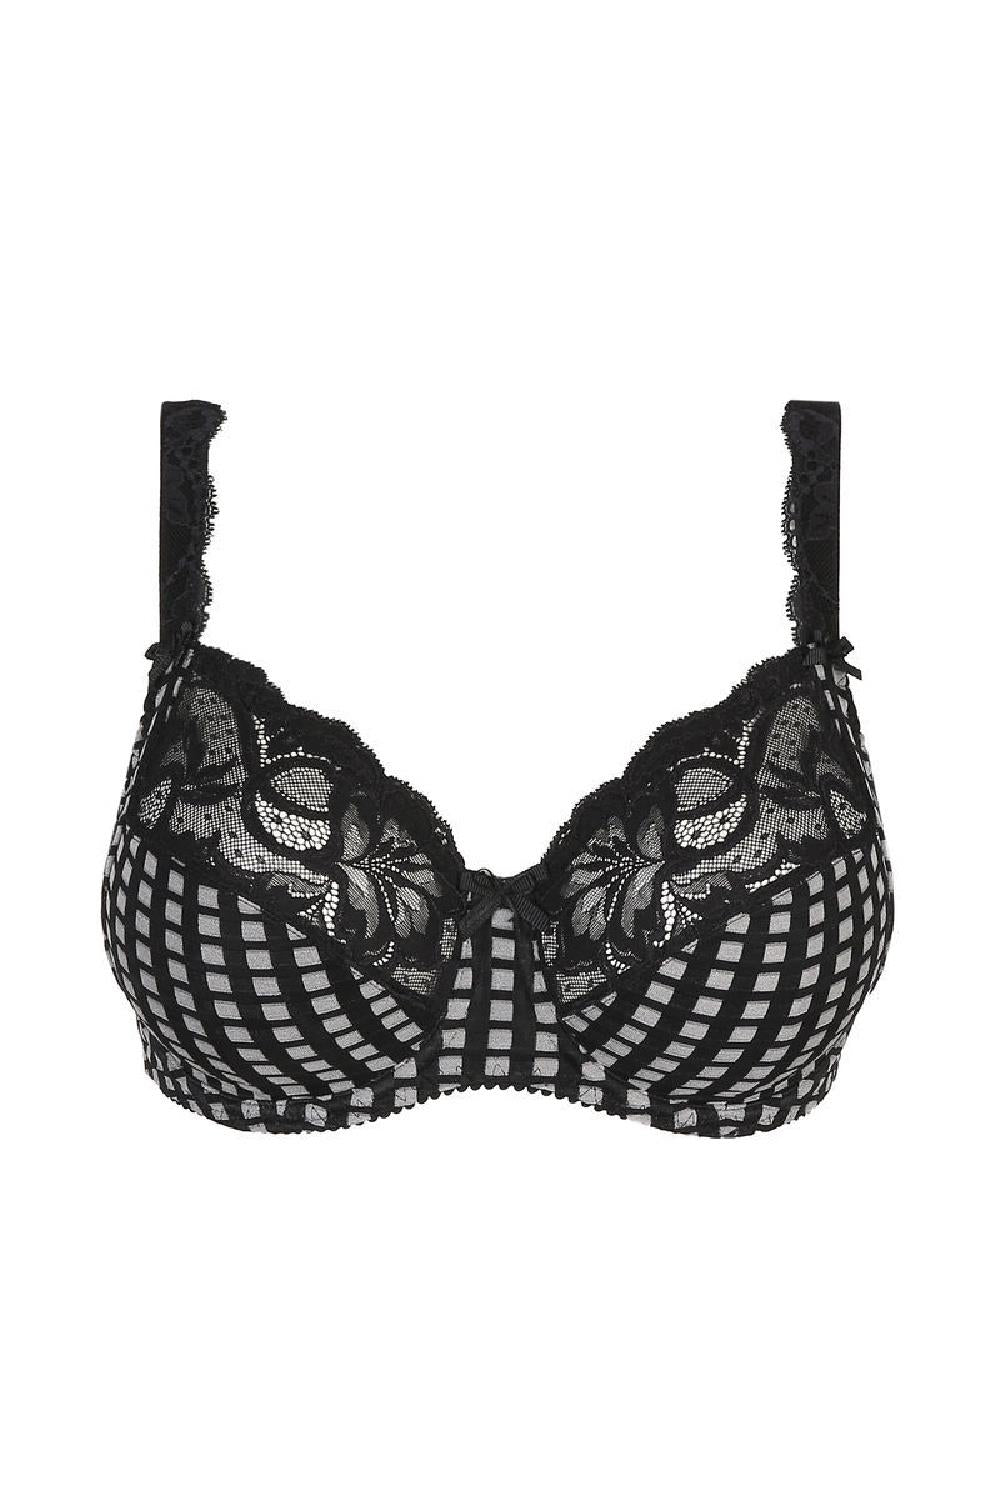 Prima Donna Madison Full Cup Bra 0162120 – My Top Drawer